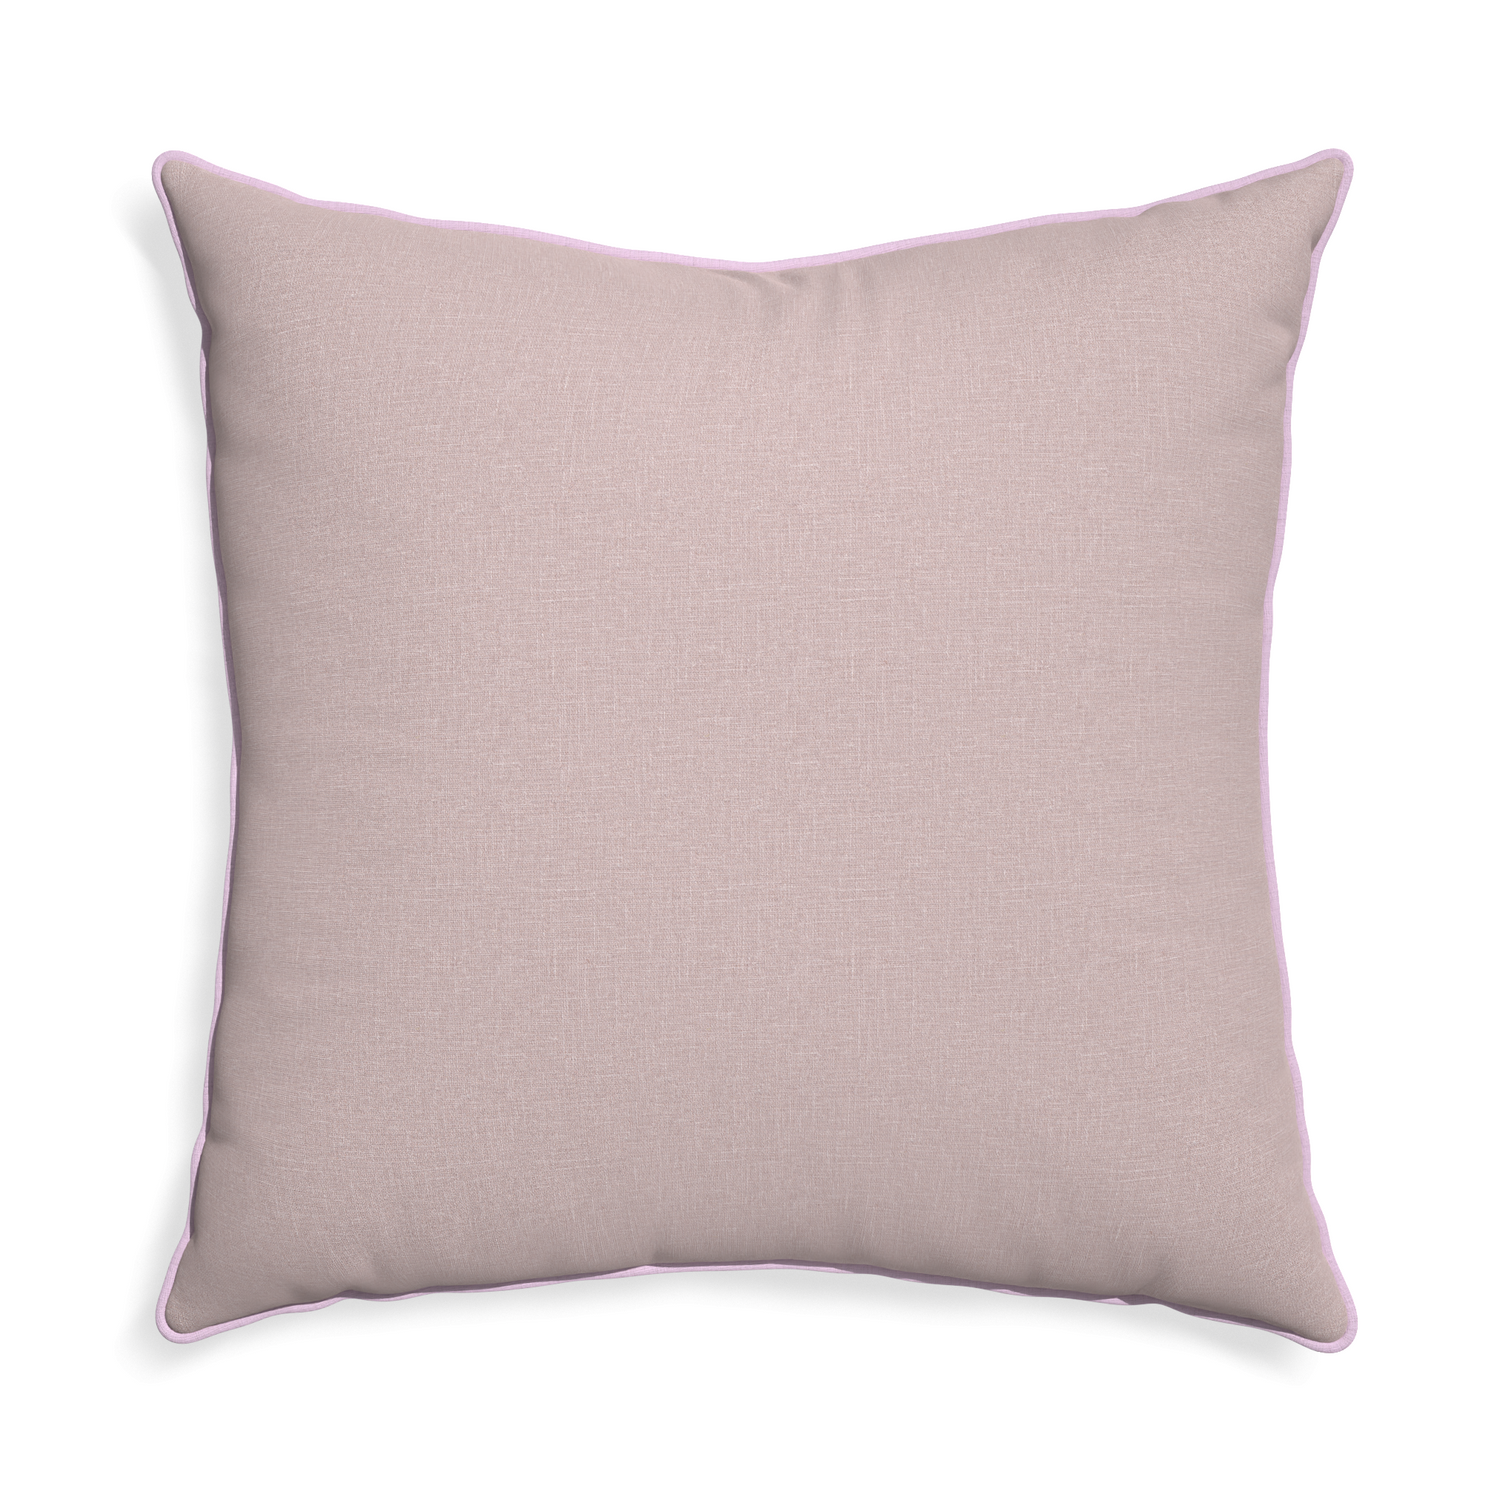 Euro-sham orchid custom mauve pinkpillow with l piping on white background